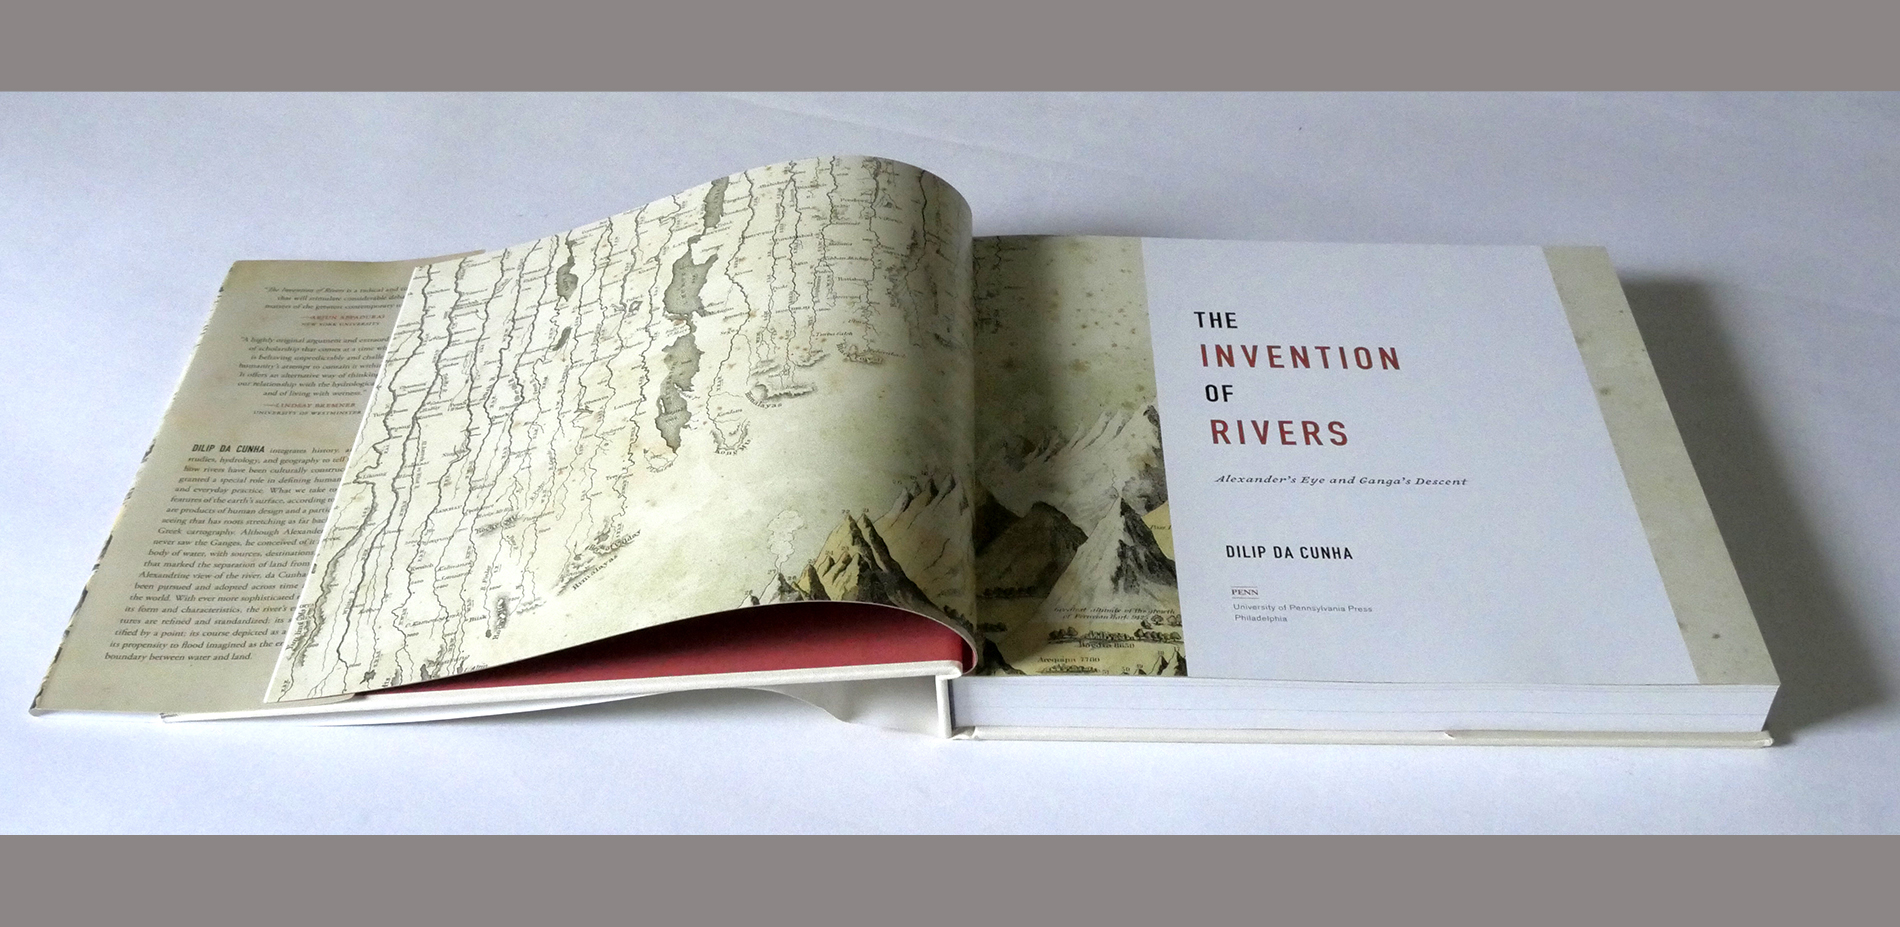 2_Invention of Rivers_opening spread